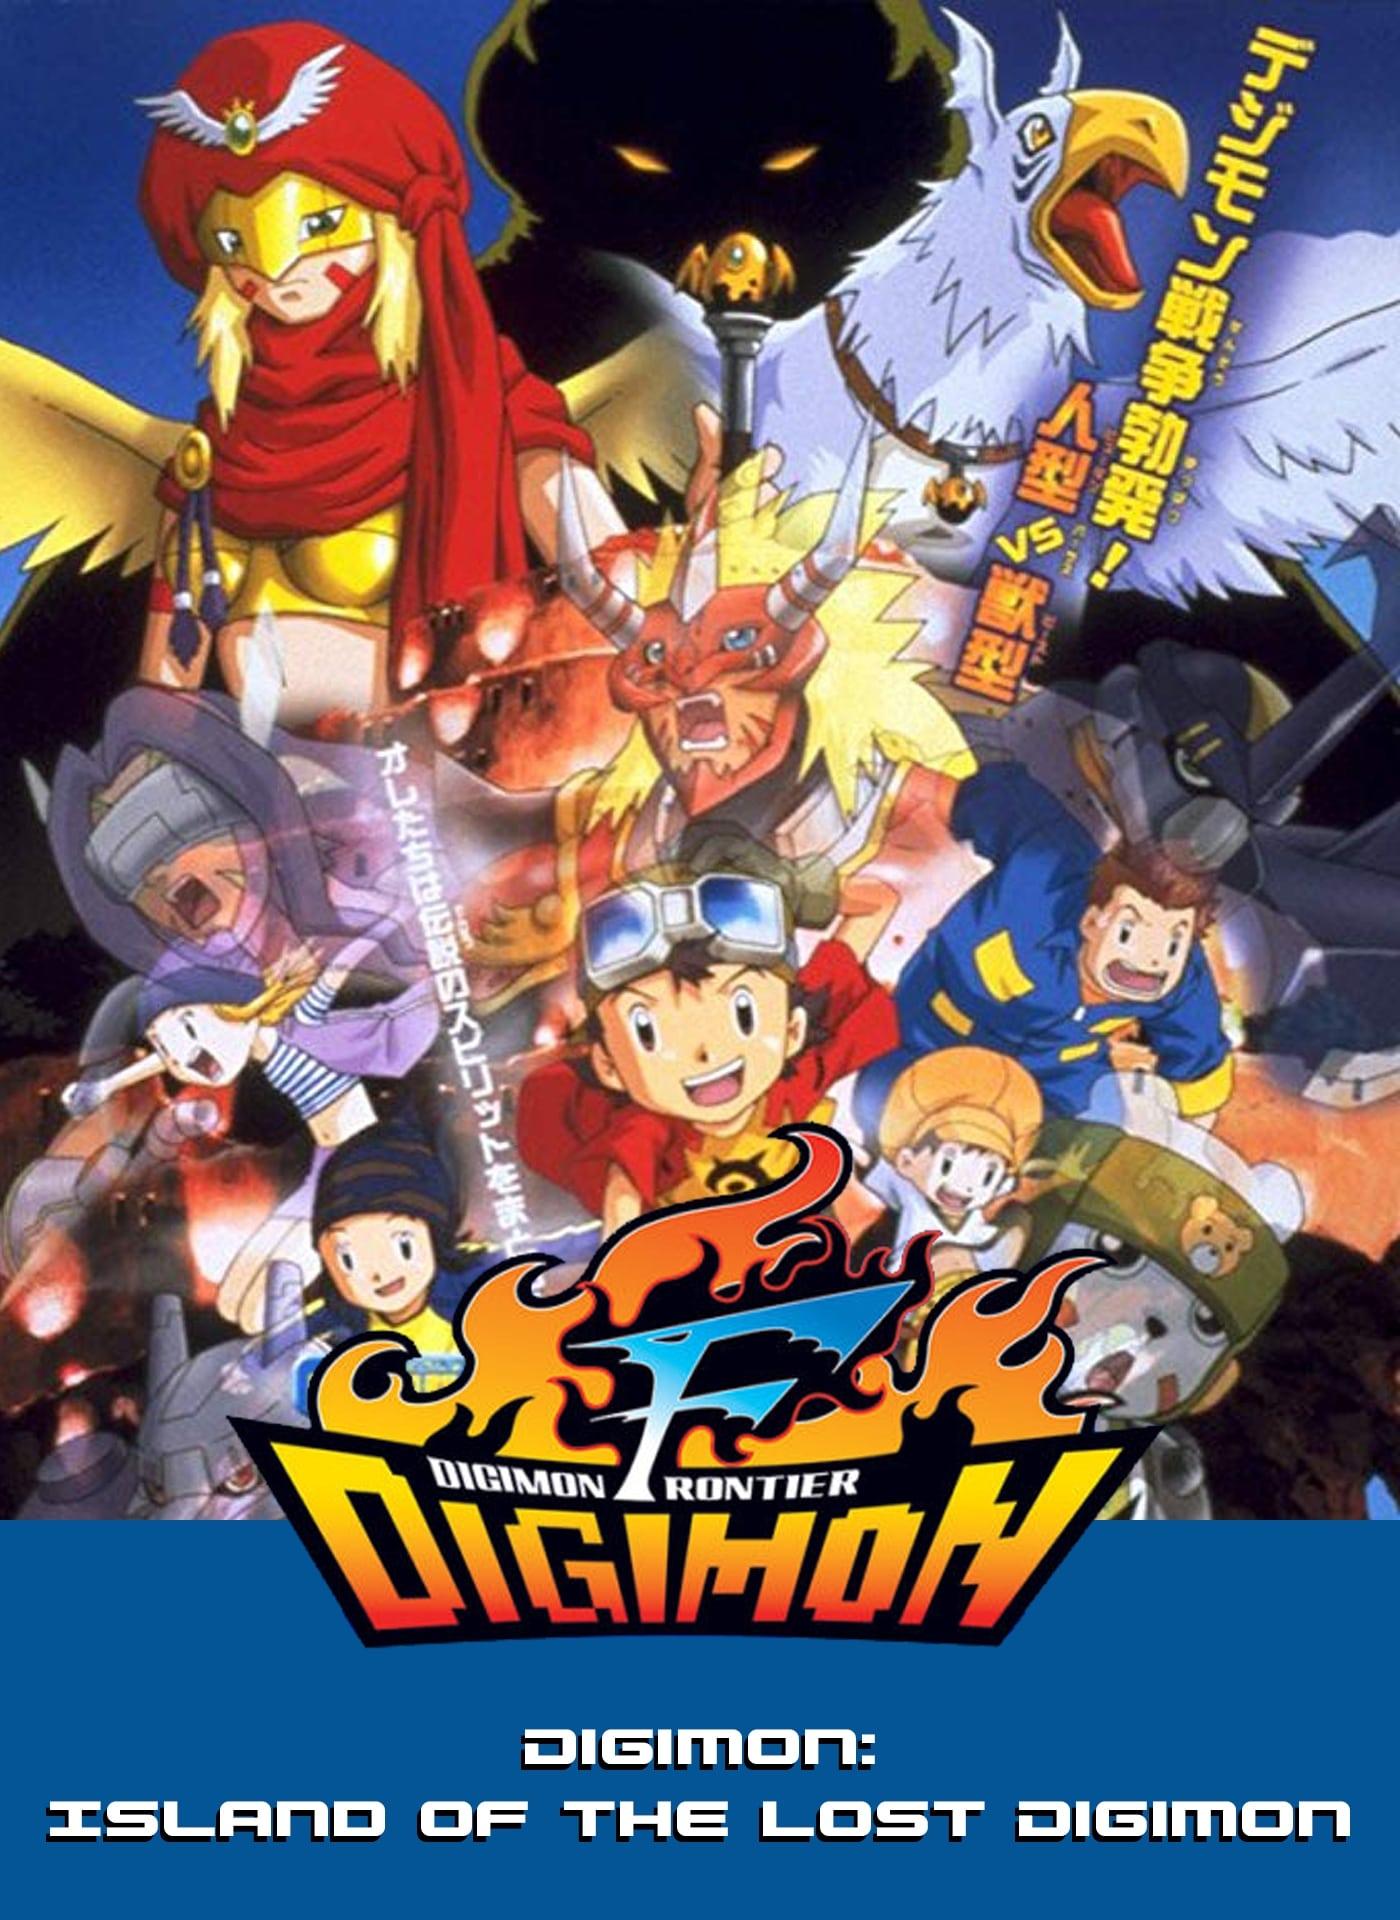 Digimon Frontier: Revival of Ancient Digimon poster